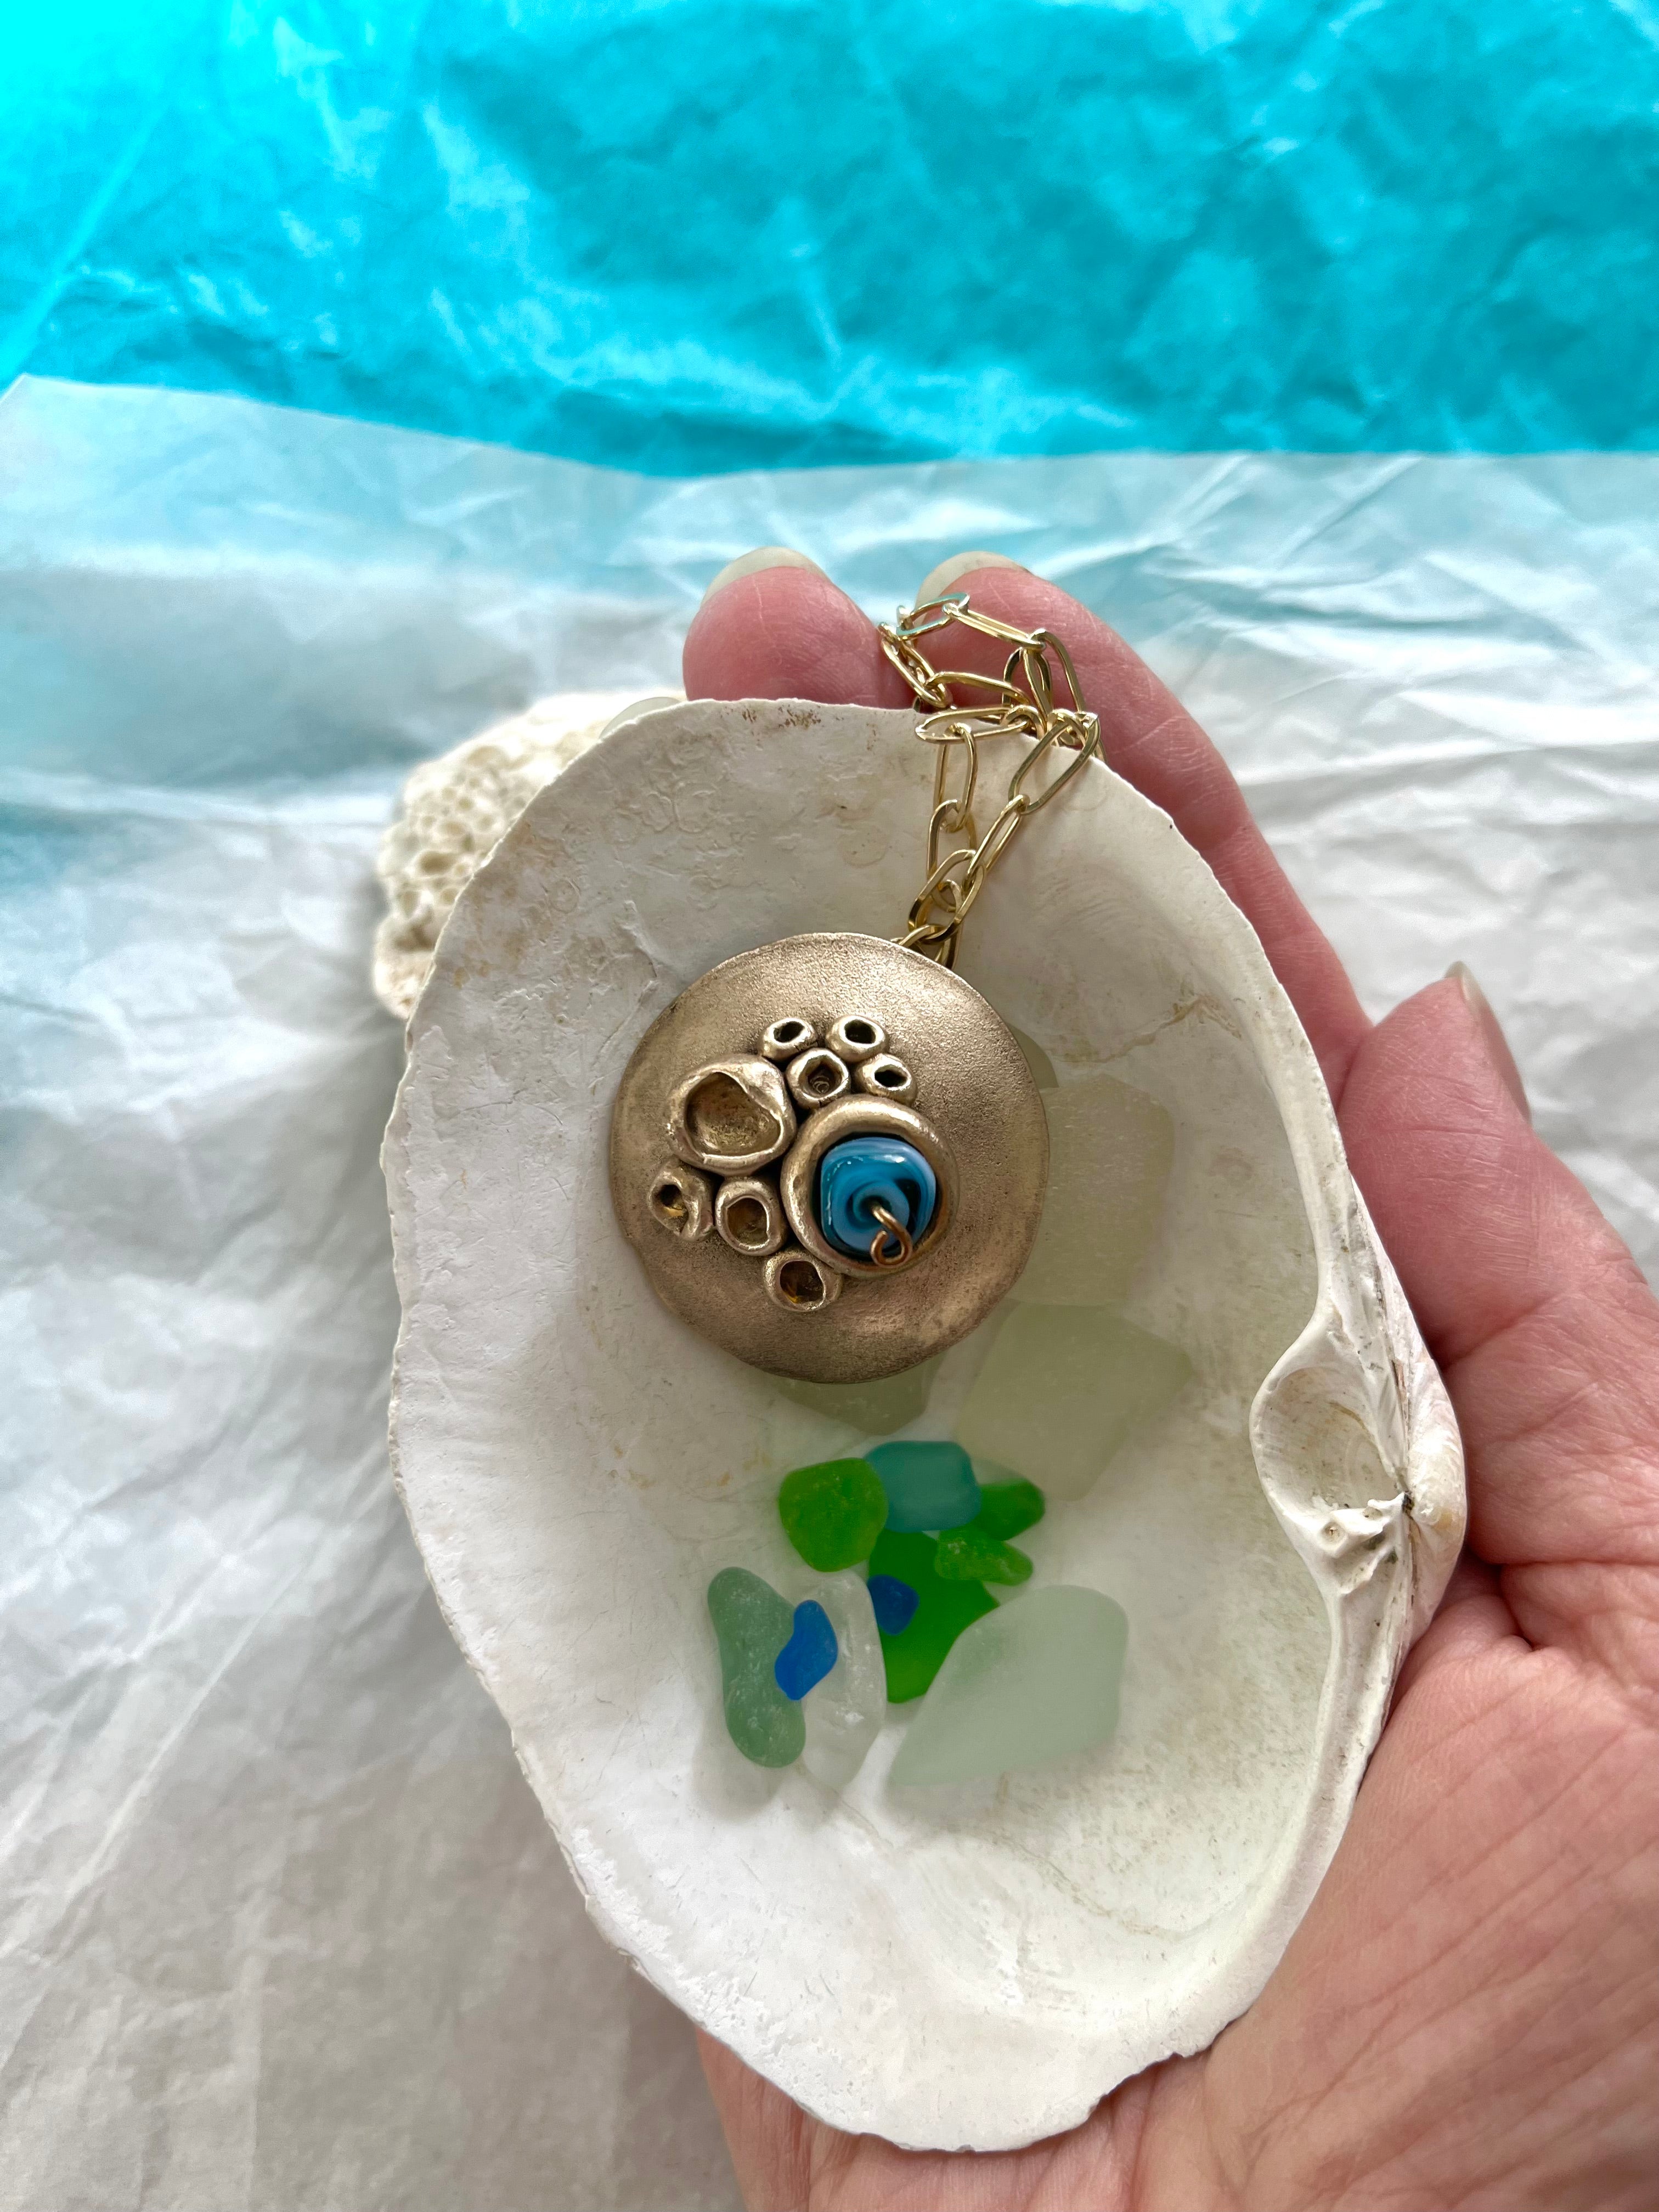 Handheld seashell with bronze necklace and coloured seaglass inside